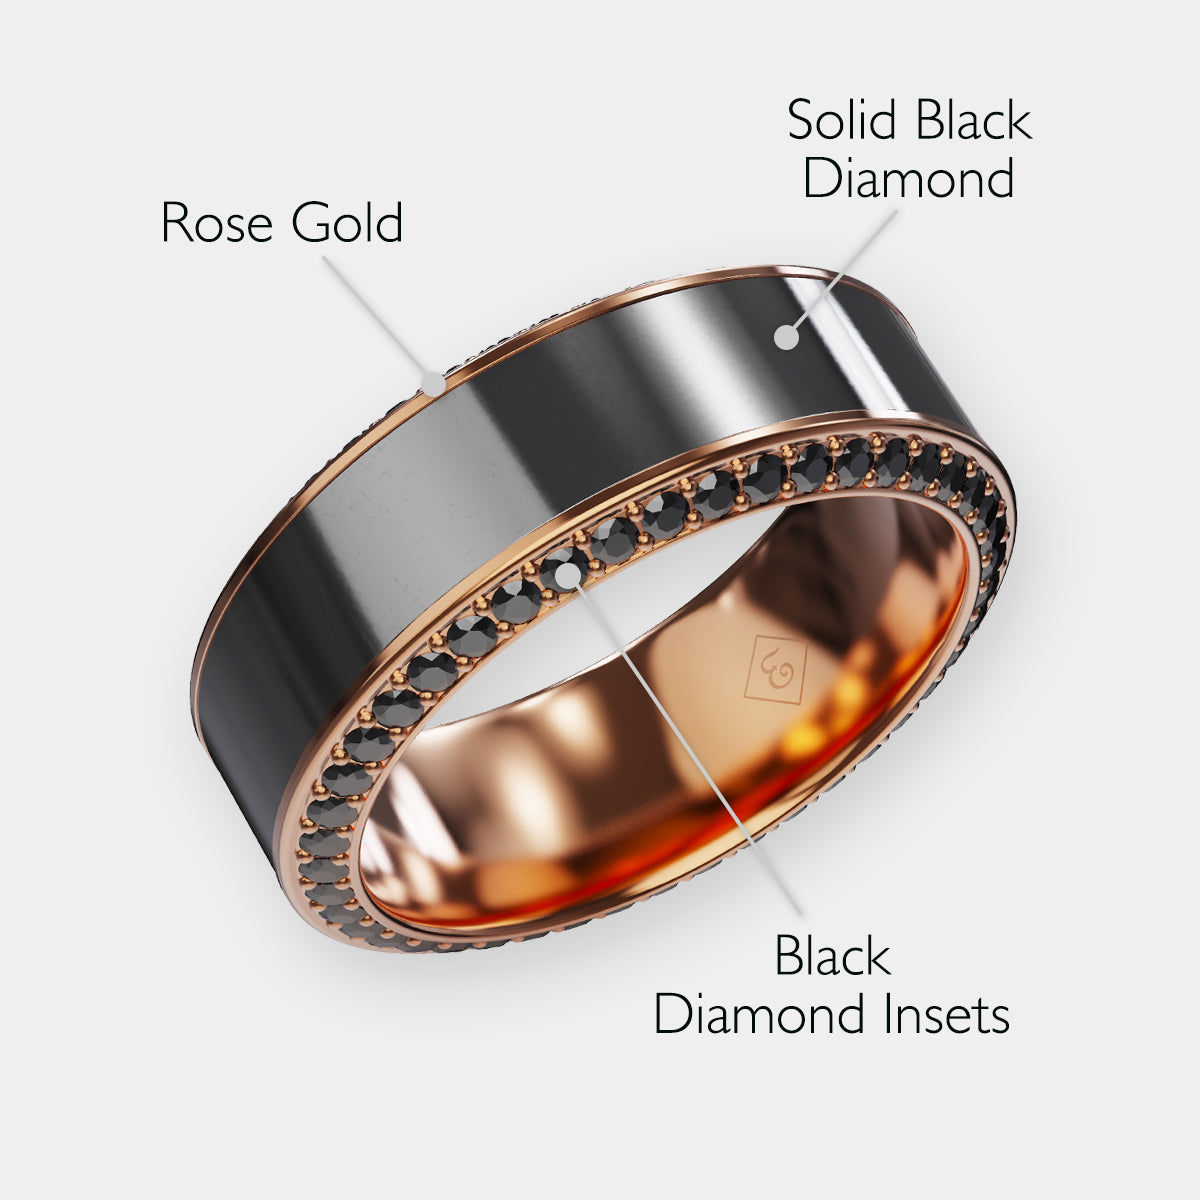 Men's Black Diamond 8mm Ring with Rose Gold Band with Black Diamond Inlay and Black Diamond Insets with material descriptions listed | Elysium HELIOS | Men’s Rose Gold Rings